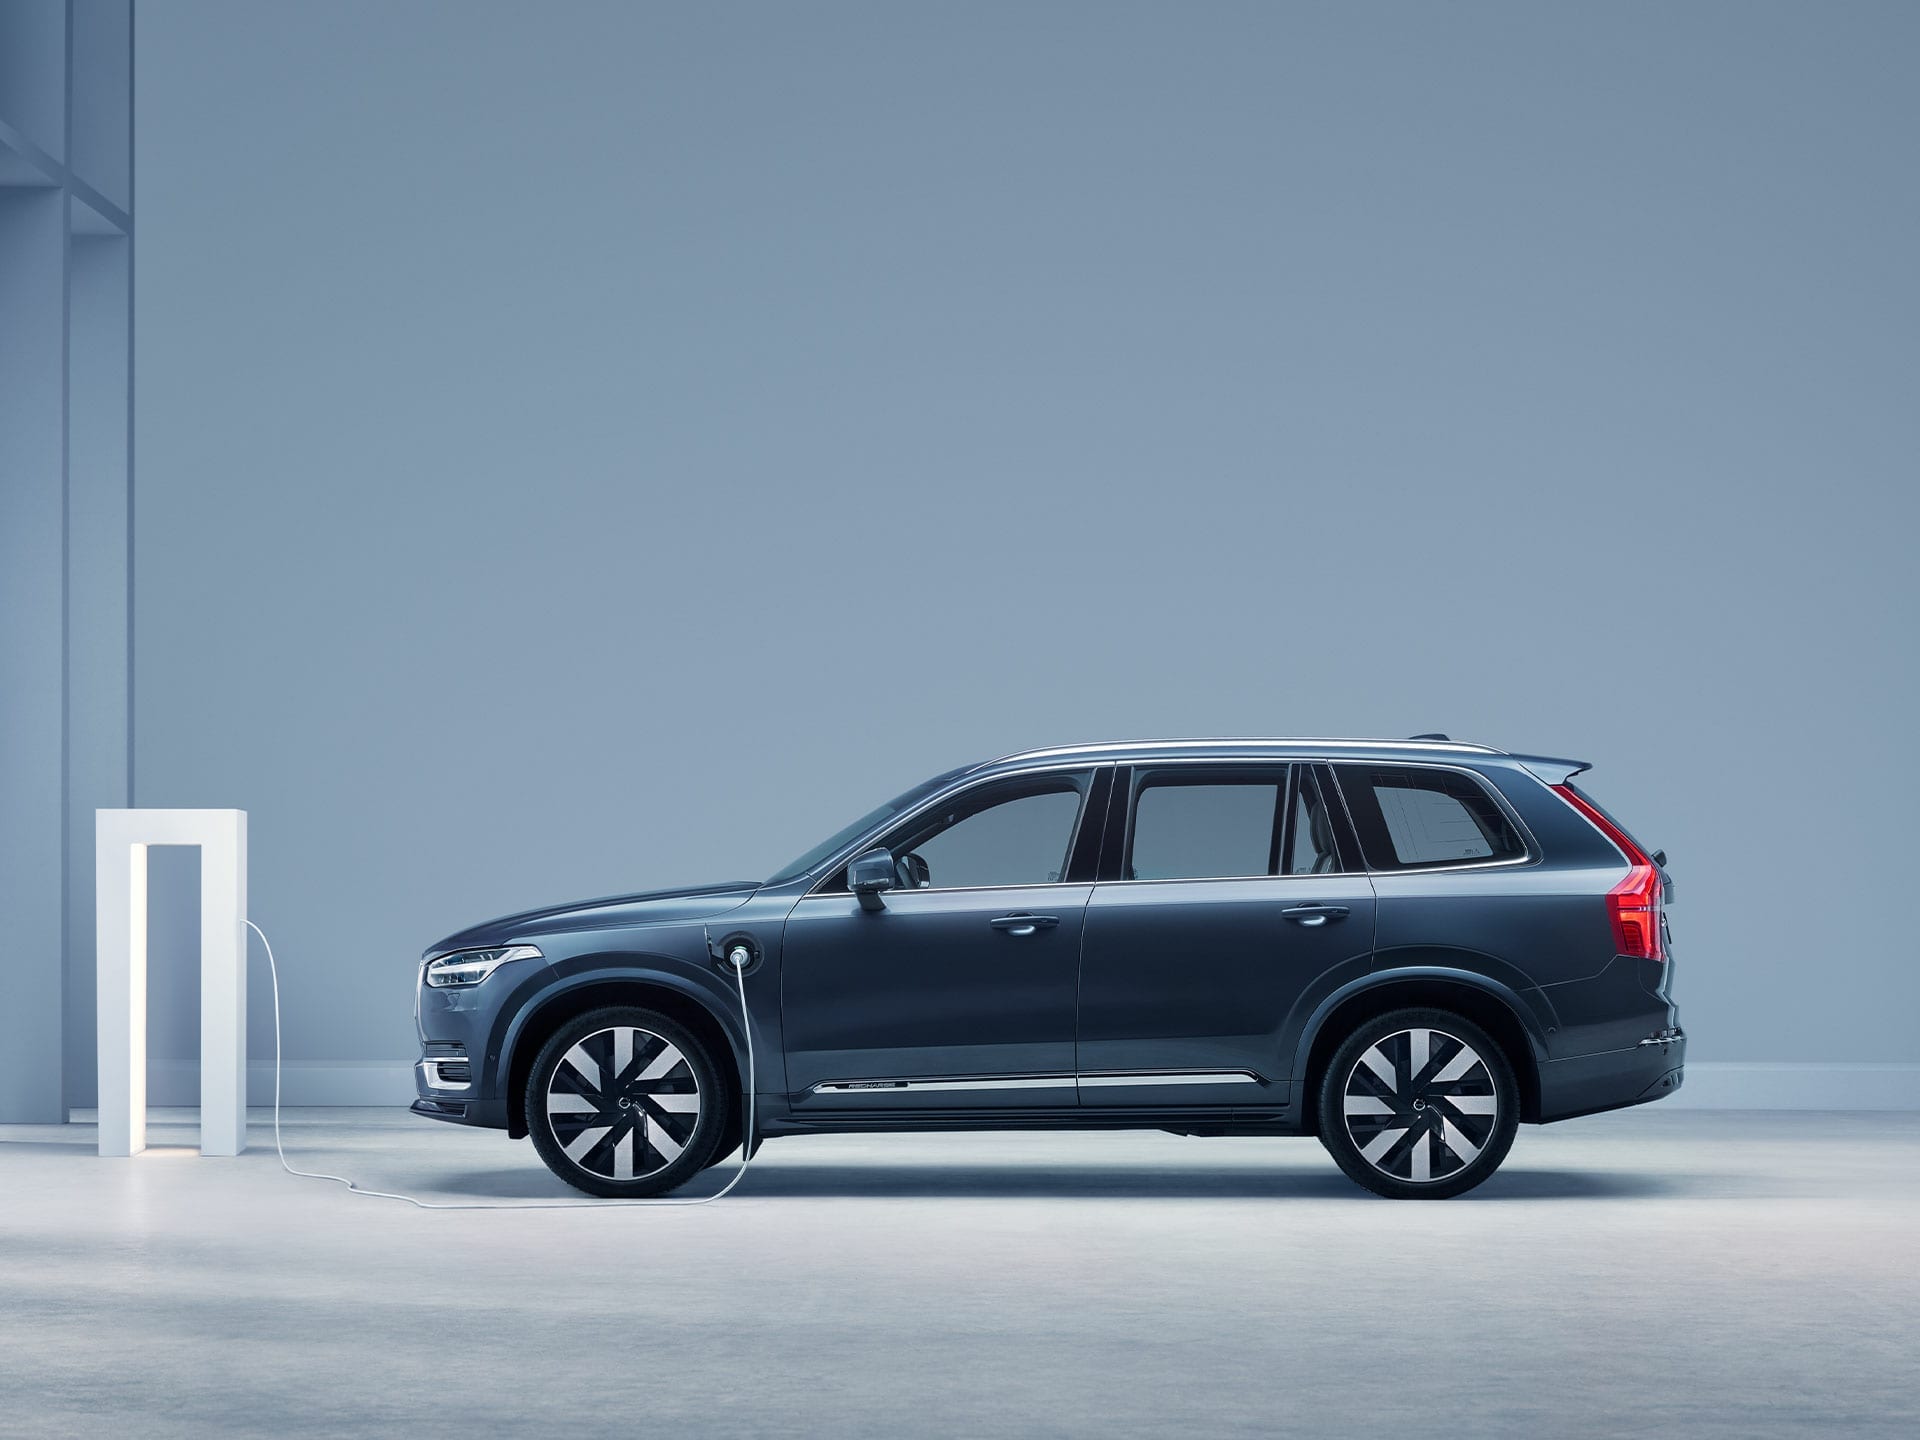 The side profile of a Volvo XC90 plug-in hybrid SUV.